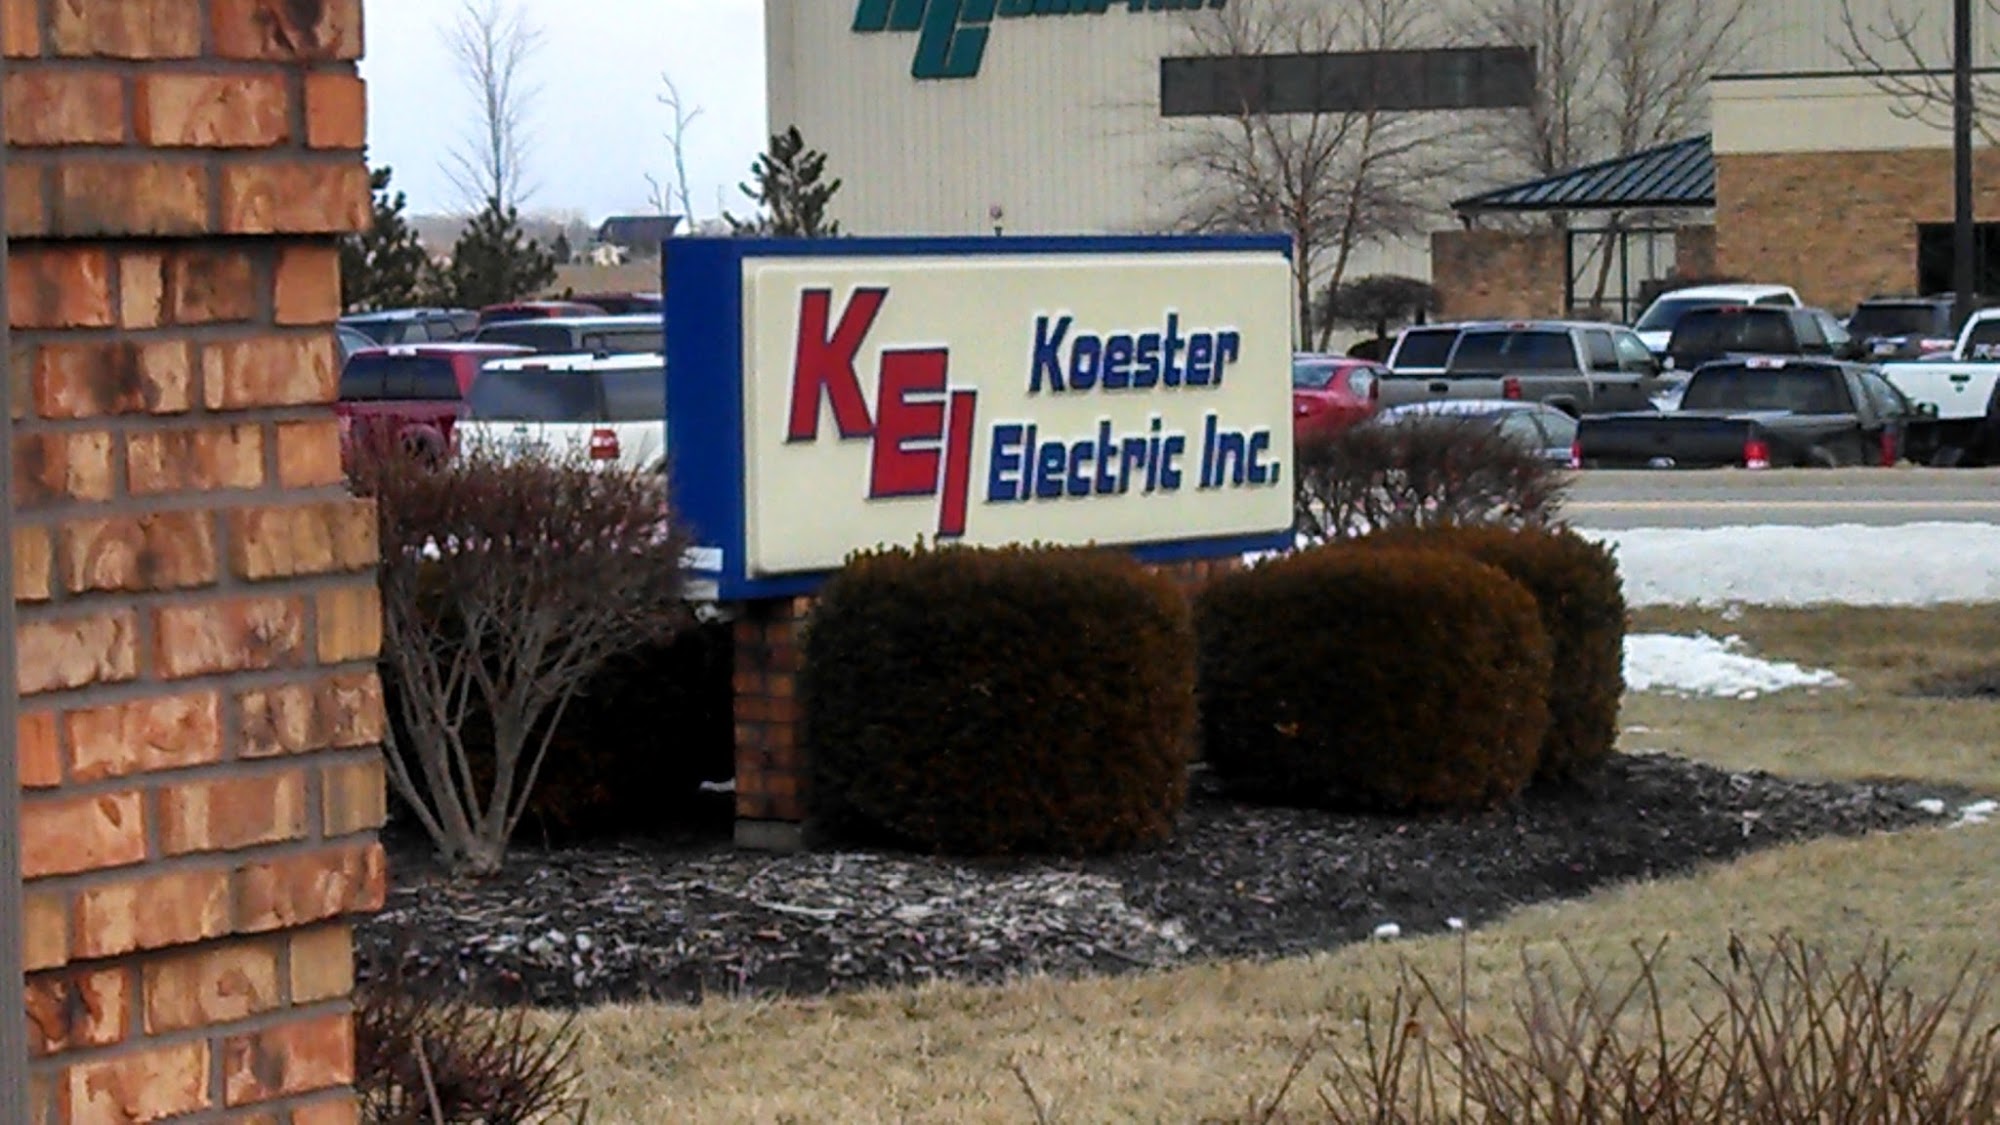 Koester Electric Inc 1000 N 2nd St, Coldwater Ohio 45828